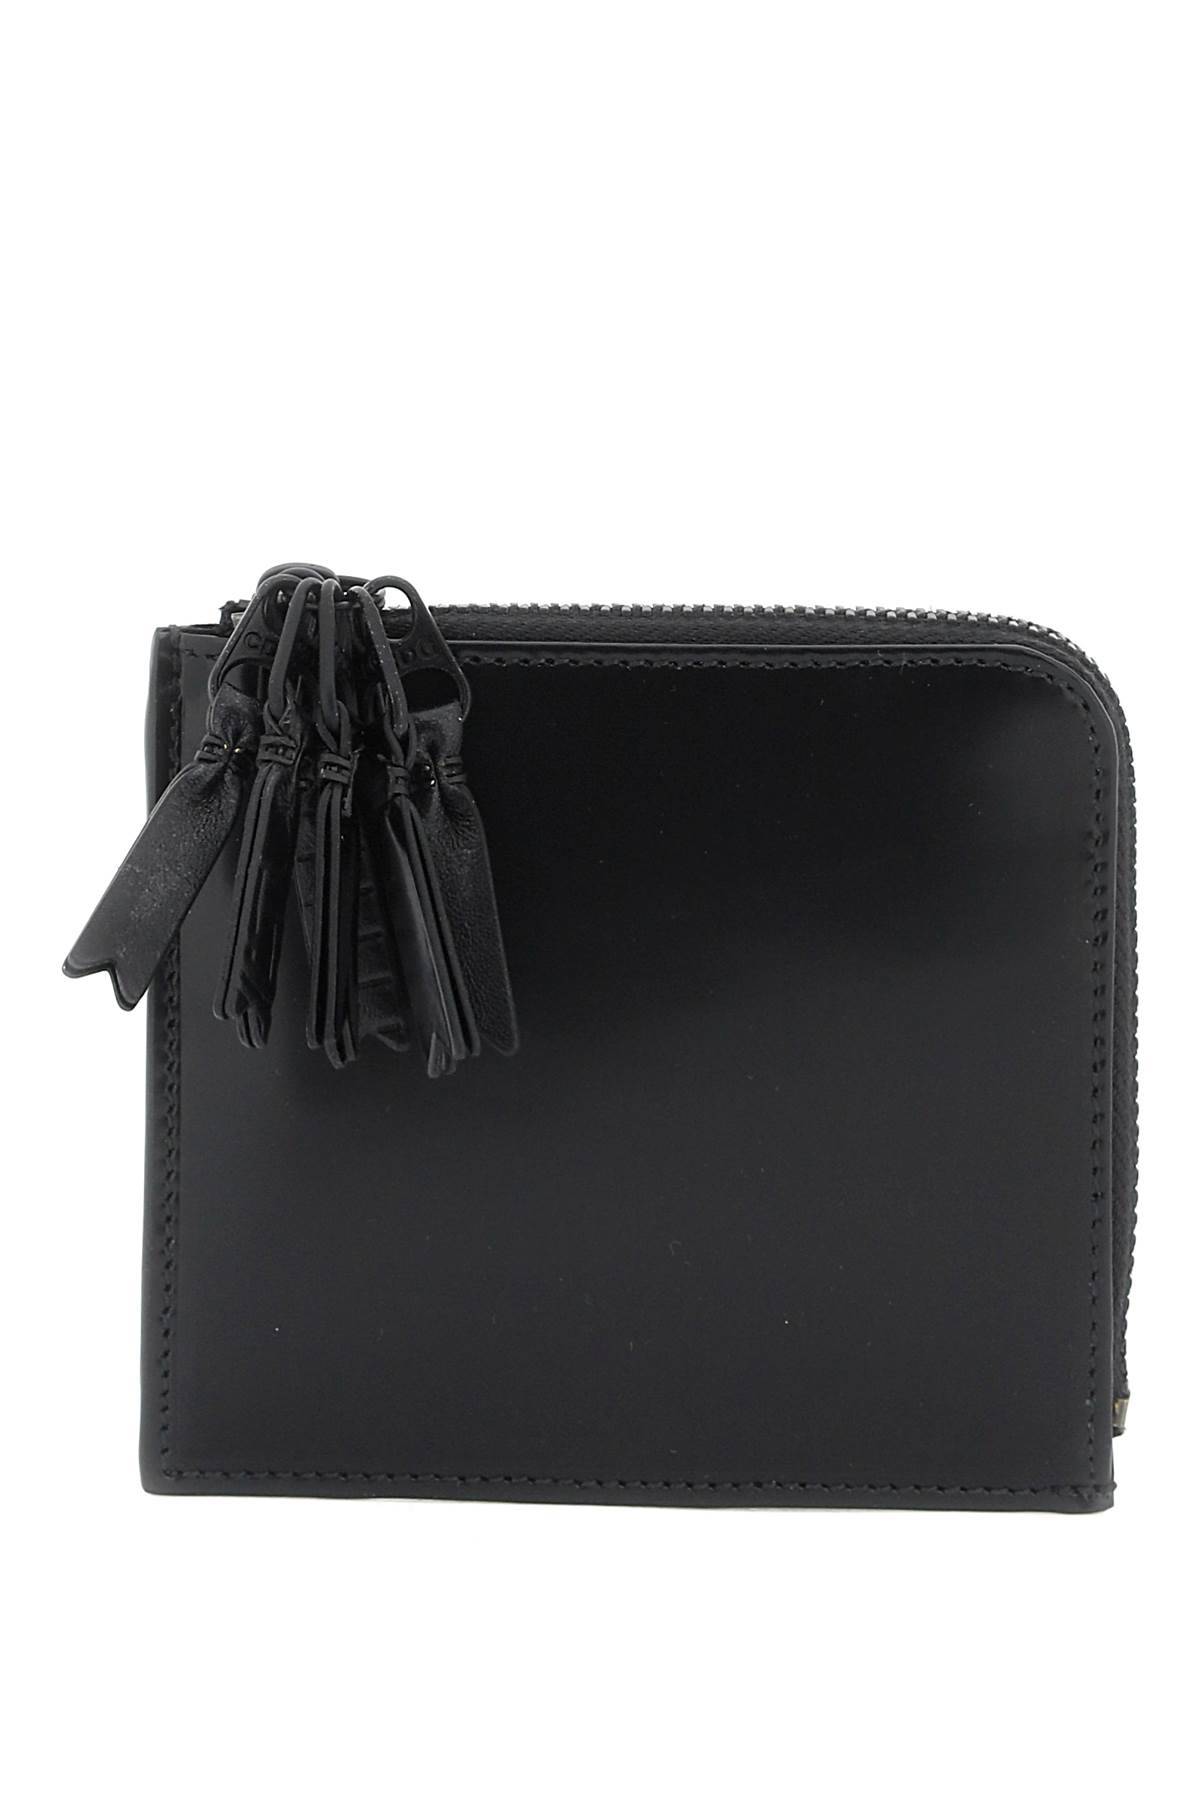 COMME DES GARCONS WALLET COMME DES GARCONS WALLET leather multi-zip wallet with